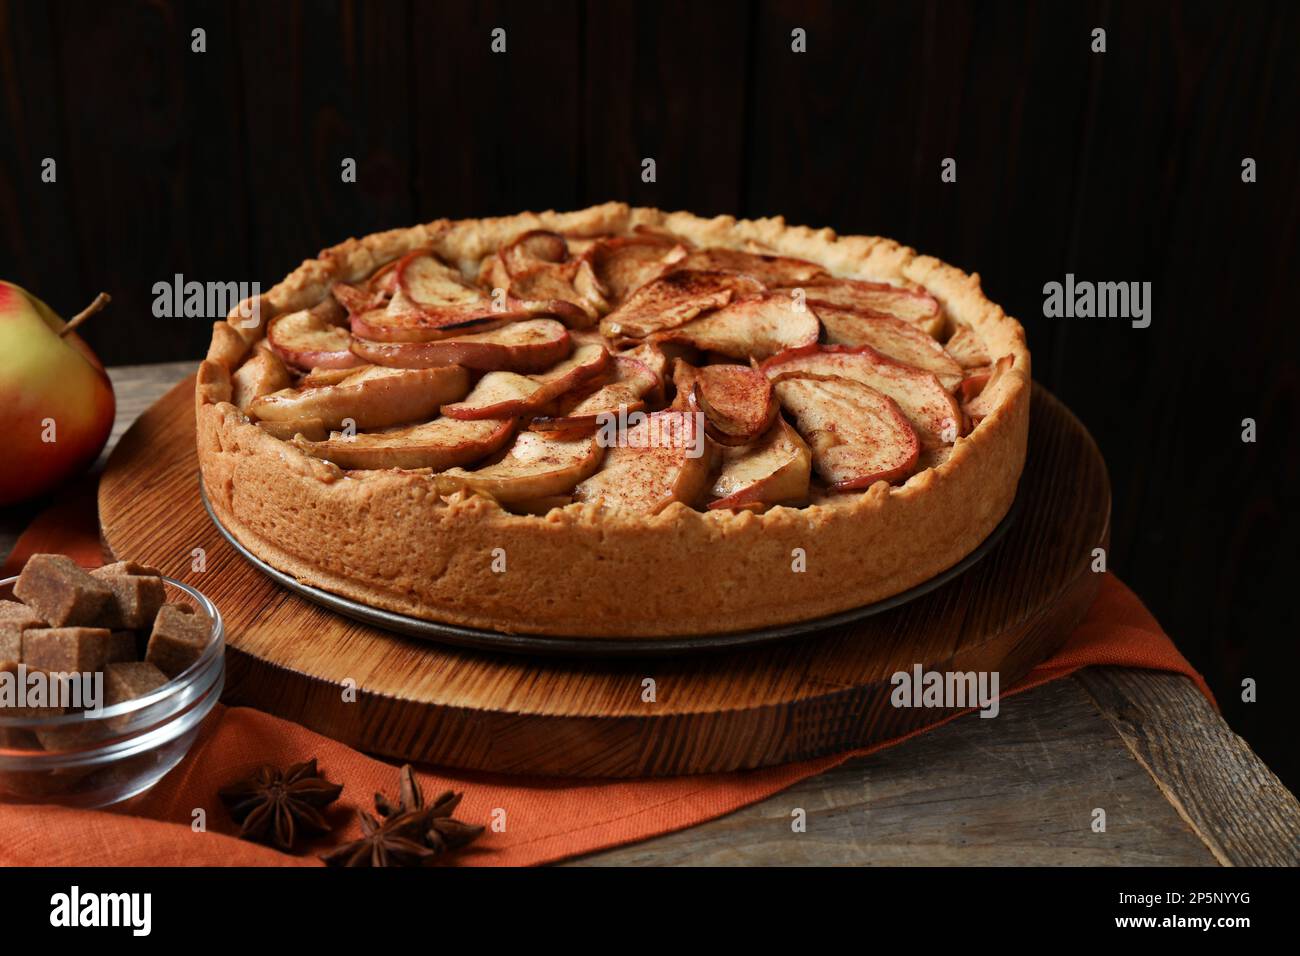 Delicious apple pie and ingredients on wooden table Stock Photo